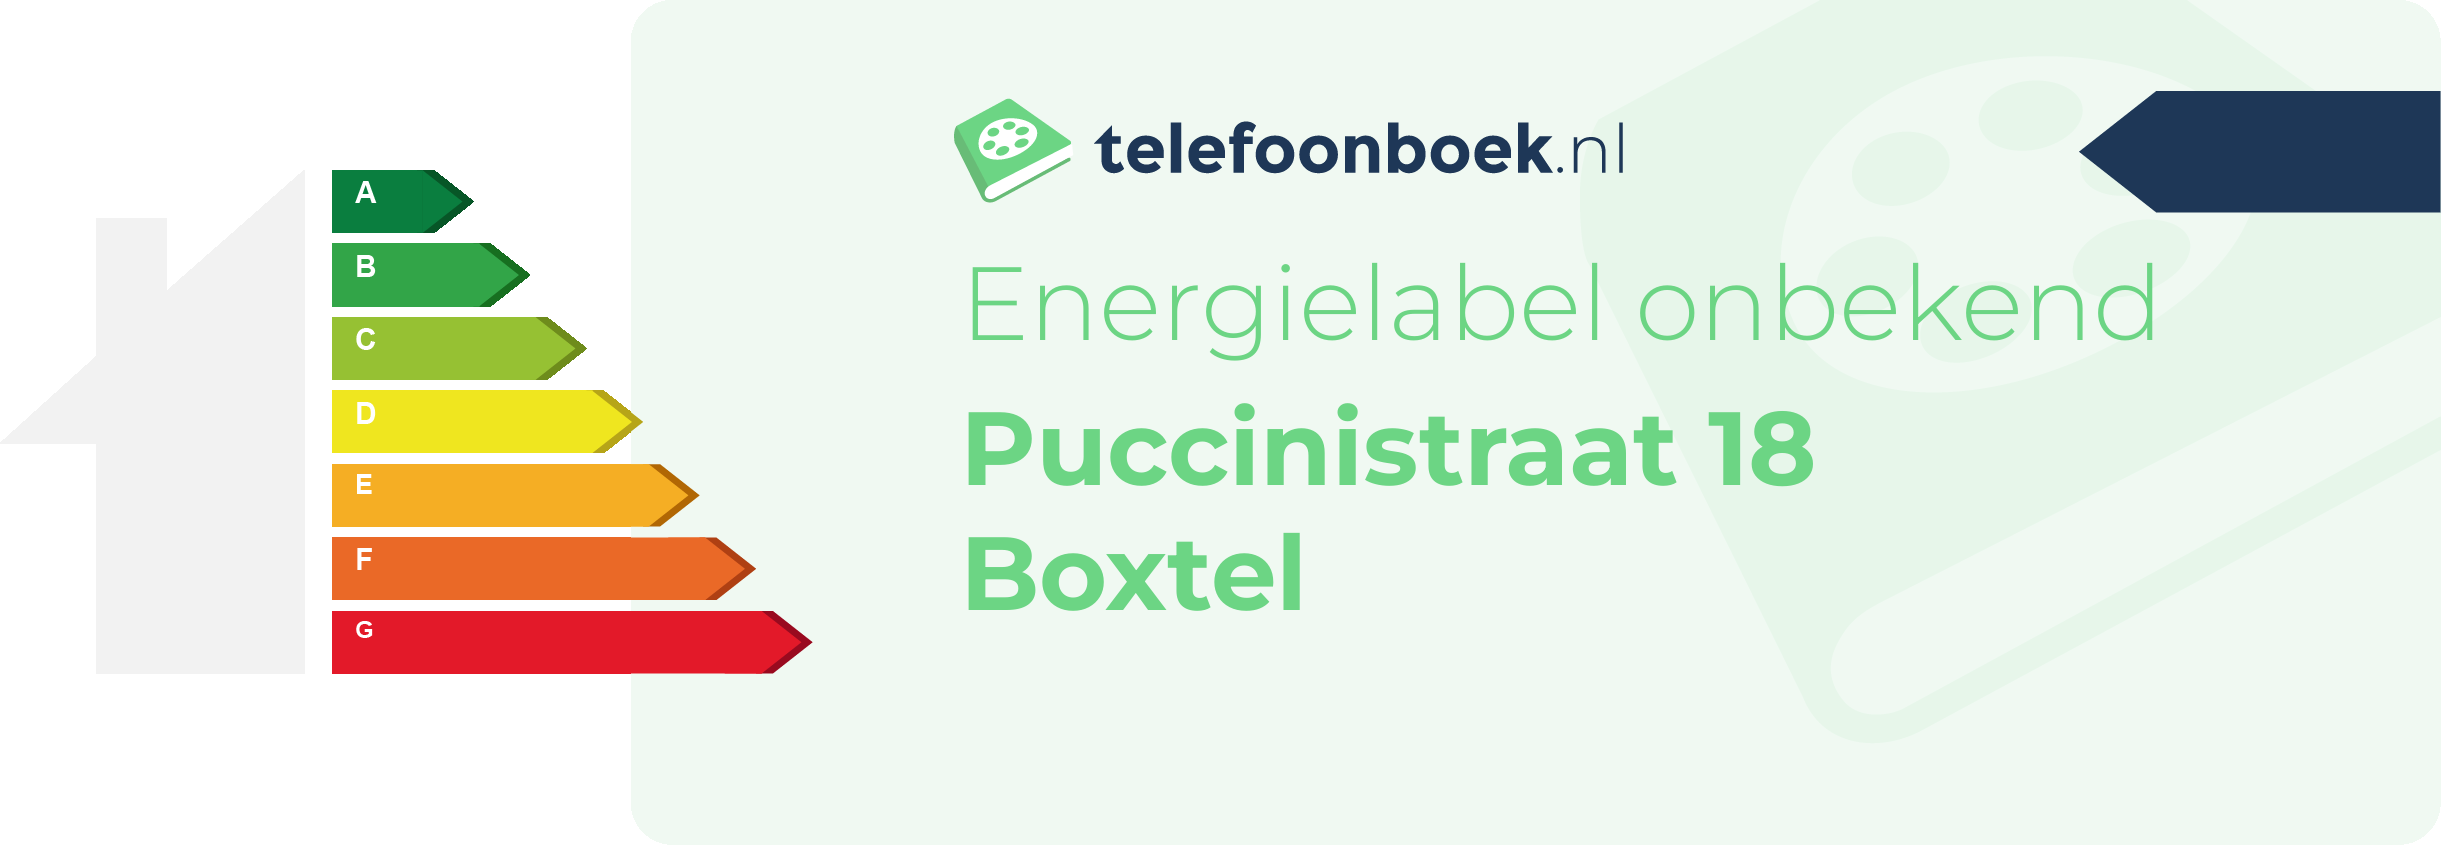 Energielabel Puccinistraat 18 Boxtel